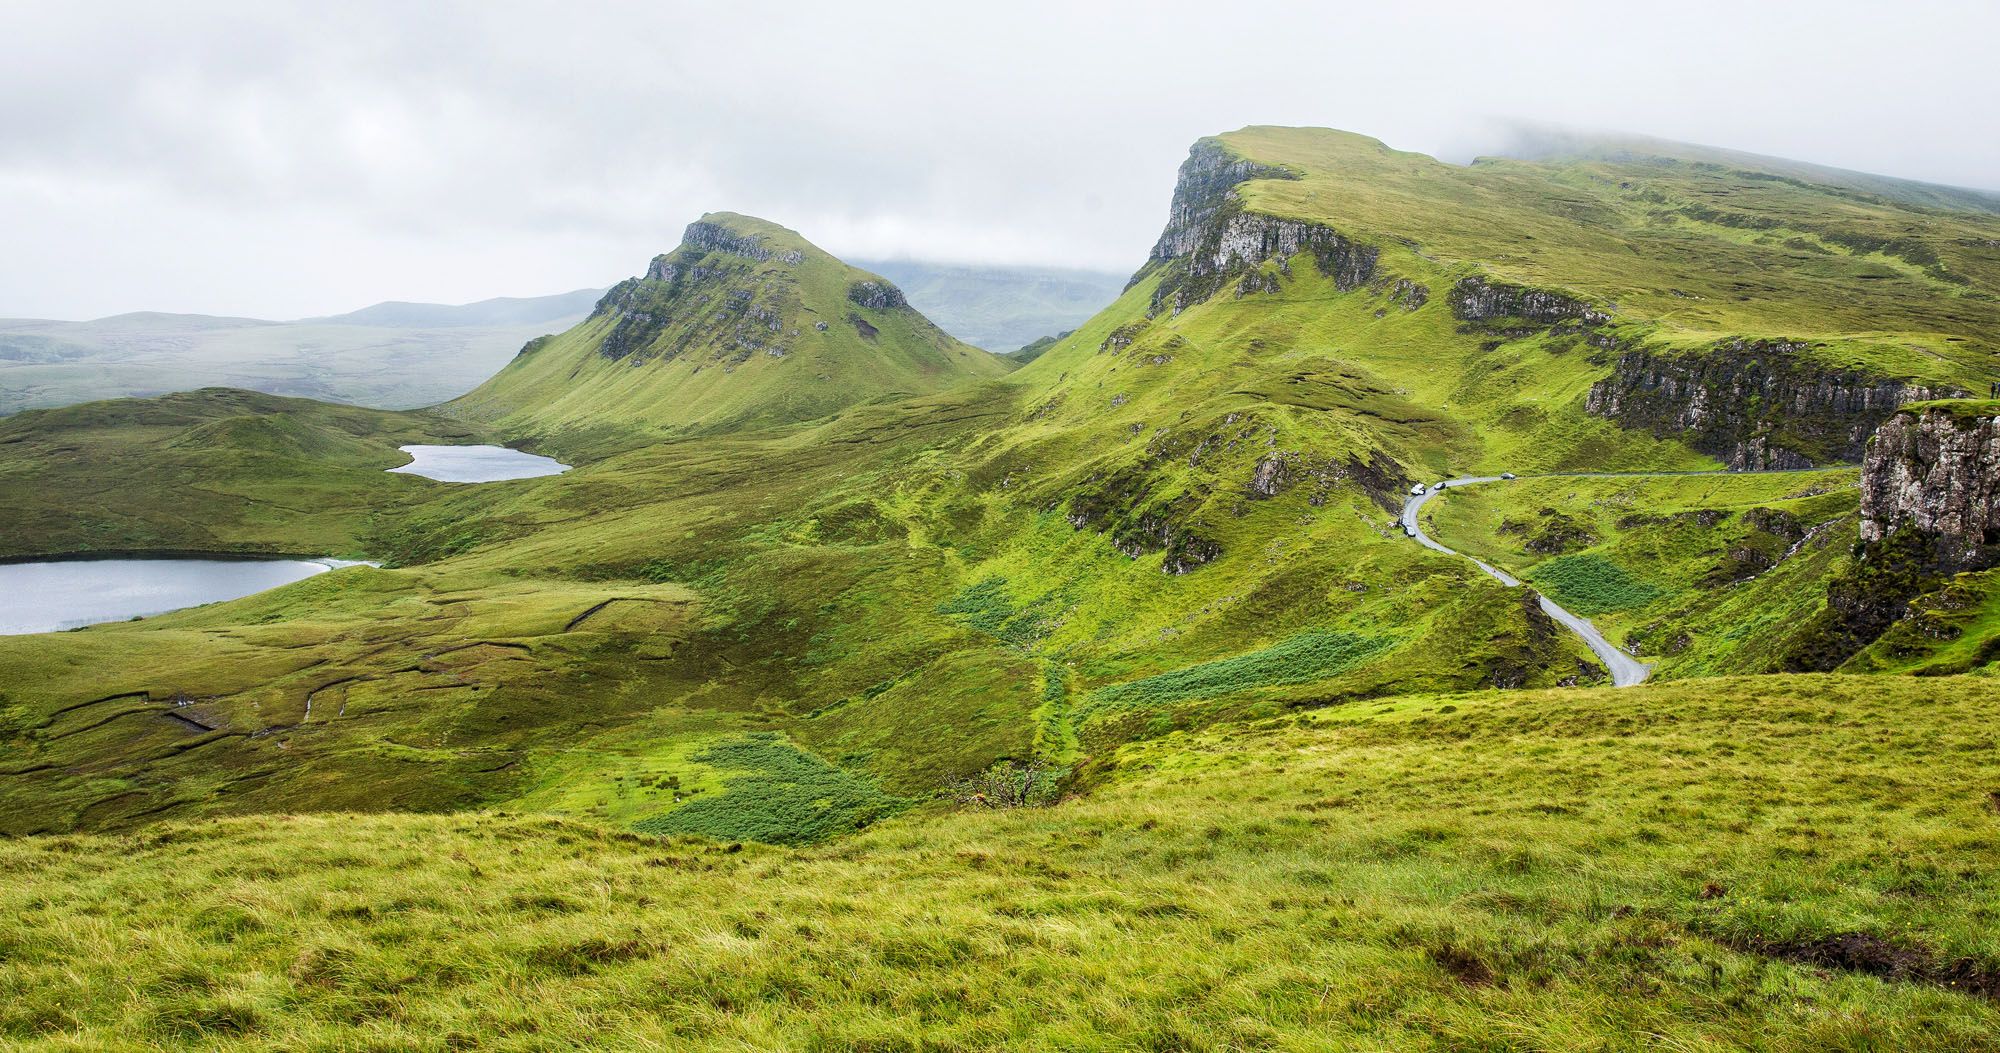 Featured image for “Hiking the Quiraing on the Isle of Skye”